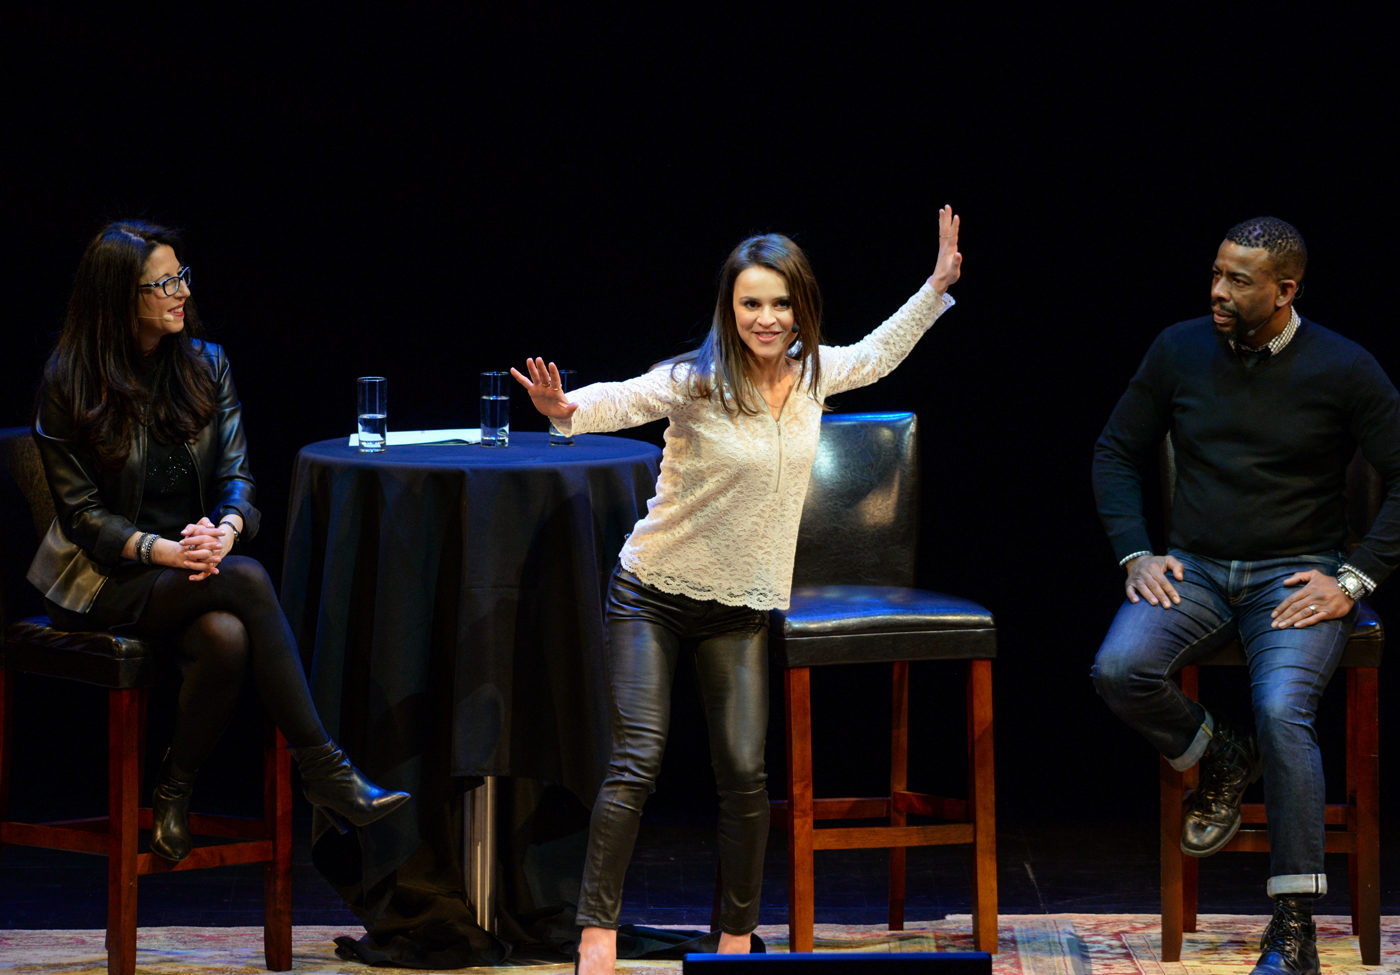 Elliot Severn's photo of Heather Berlin, Sasha Cohen, and Chuck Nice onstage at Playing with Science at BAM.